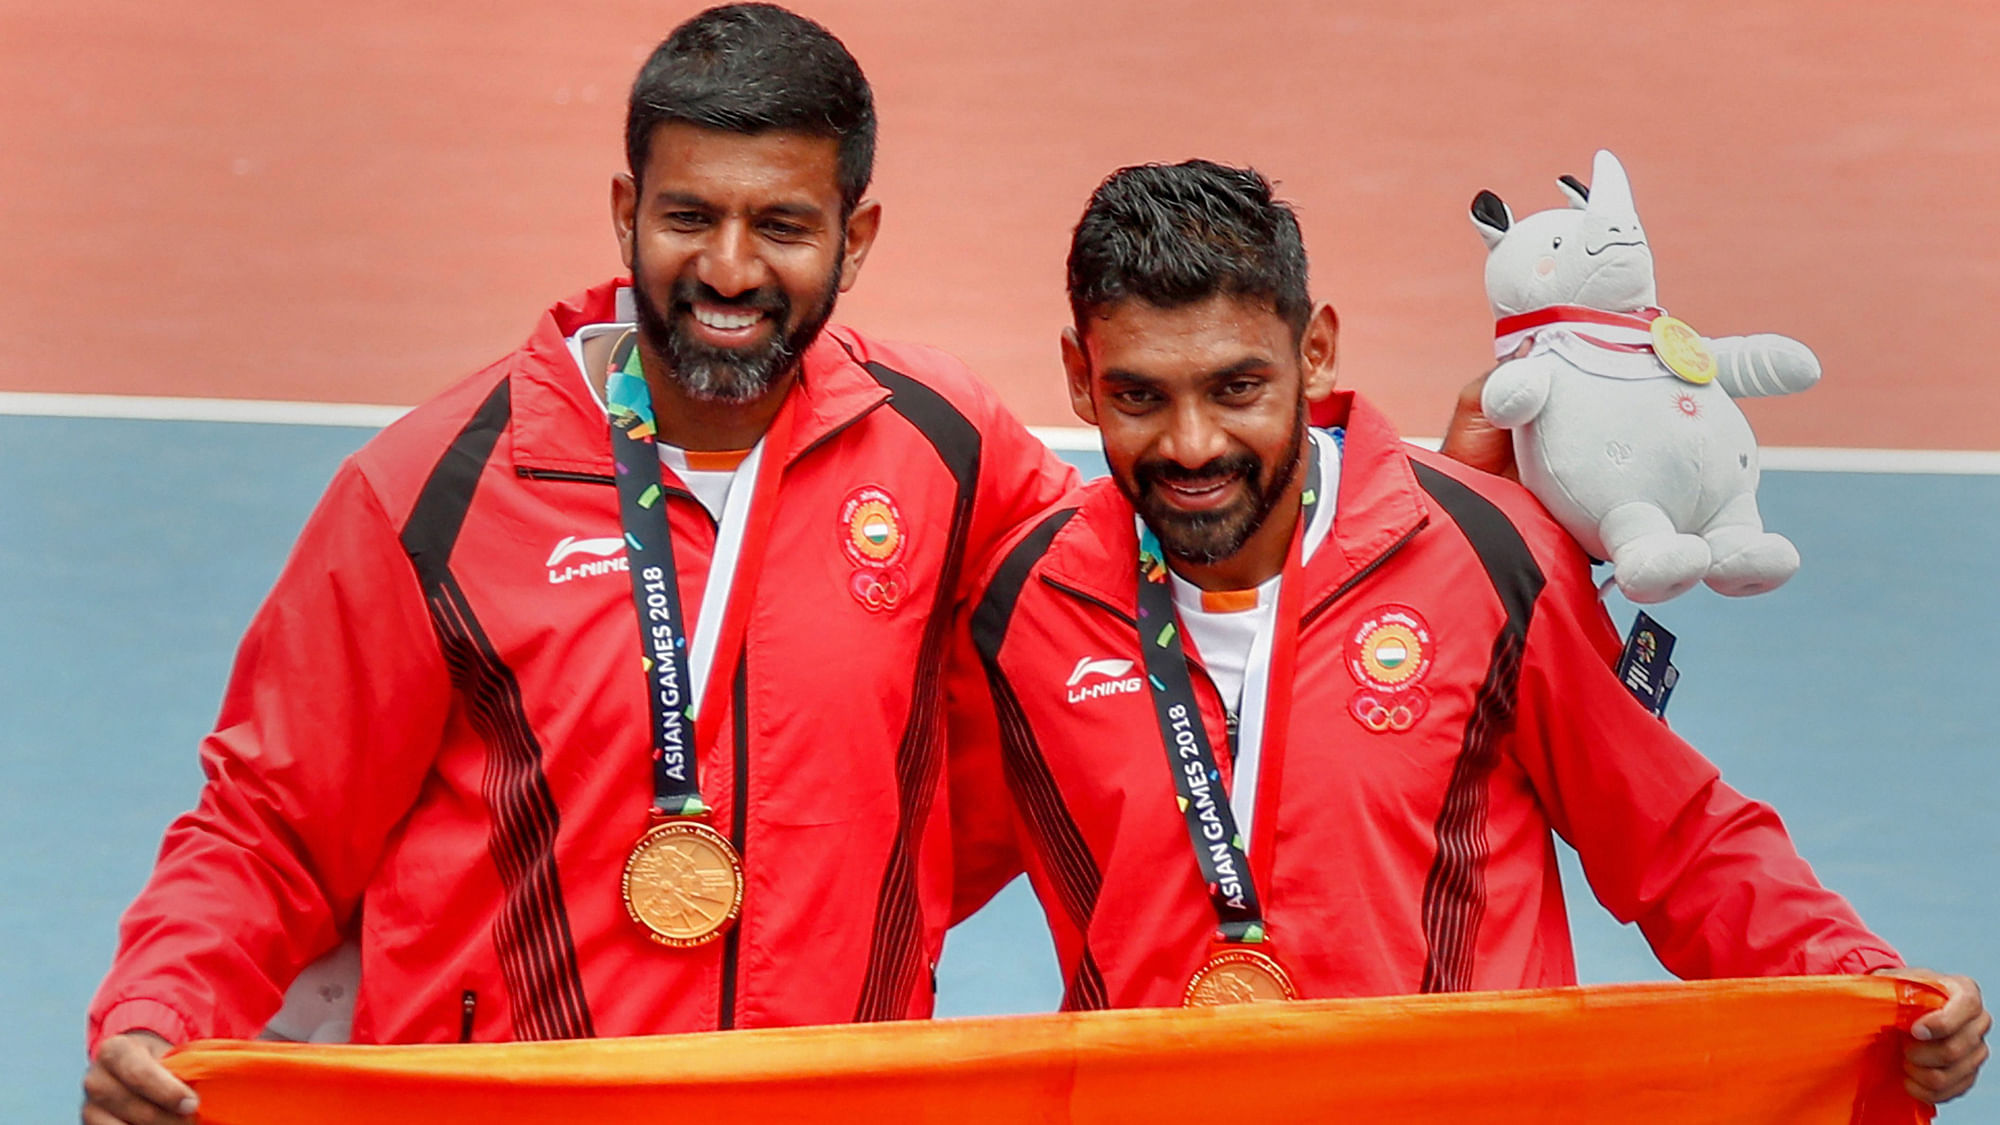 <div class="paragraphs"><p>File: Gold medalists Rohan Bopanna and Divij Sharan poses with the tricolour after the presentation ceremony for Men’s Double event at 18th Asian Games Jakarta Palembang 2018.</p></div>